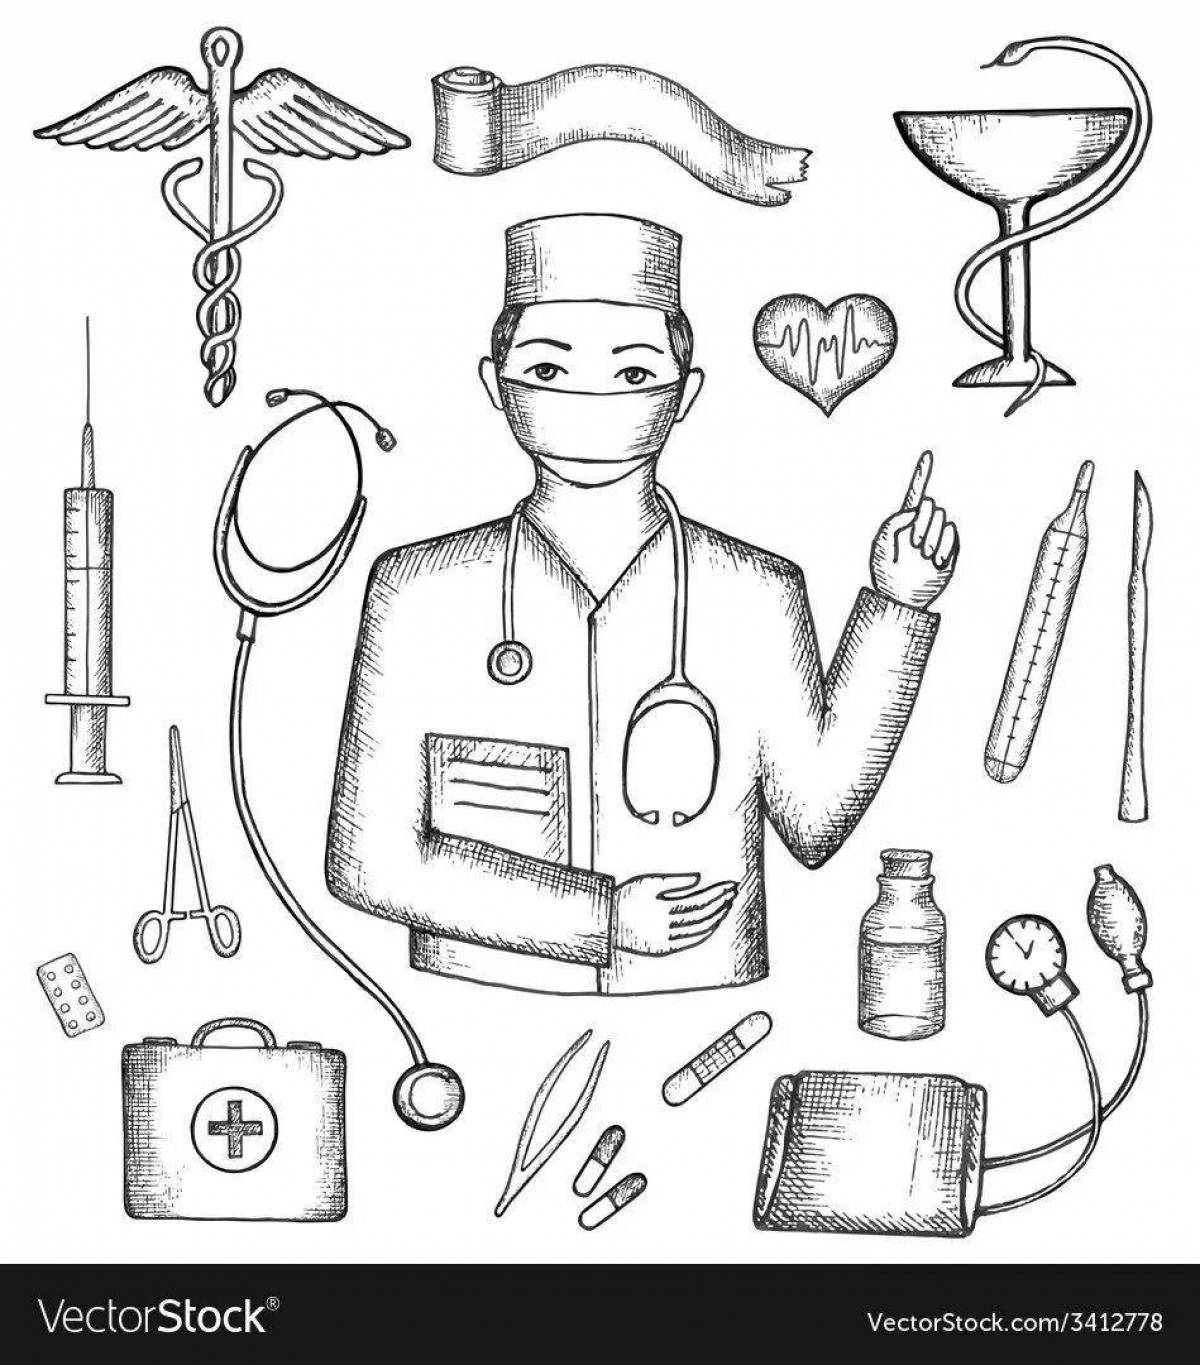 Innovative surgeon coloring book for kids